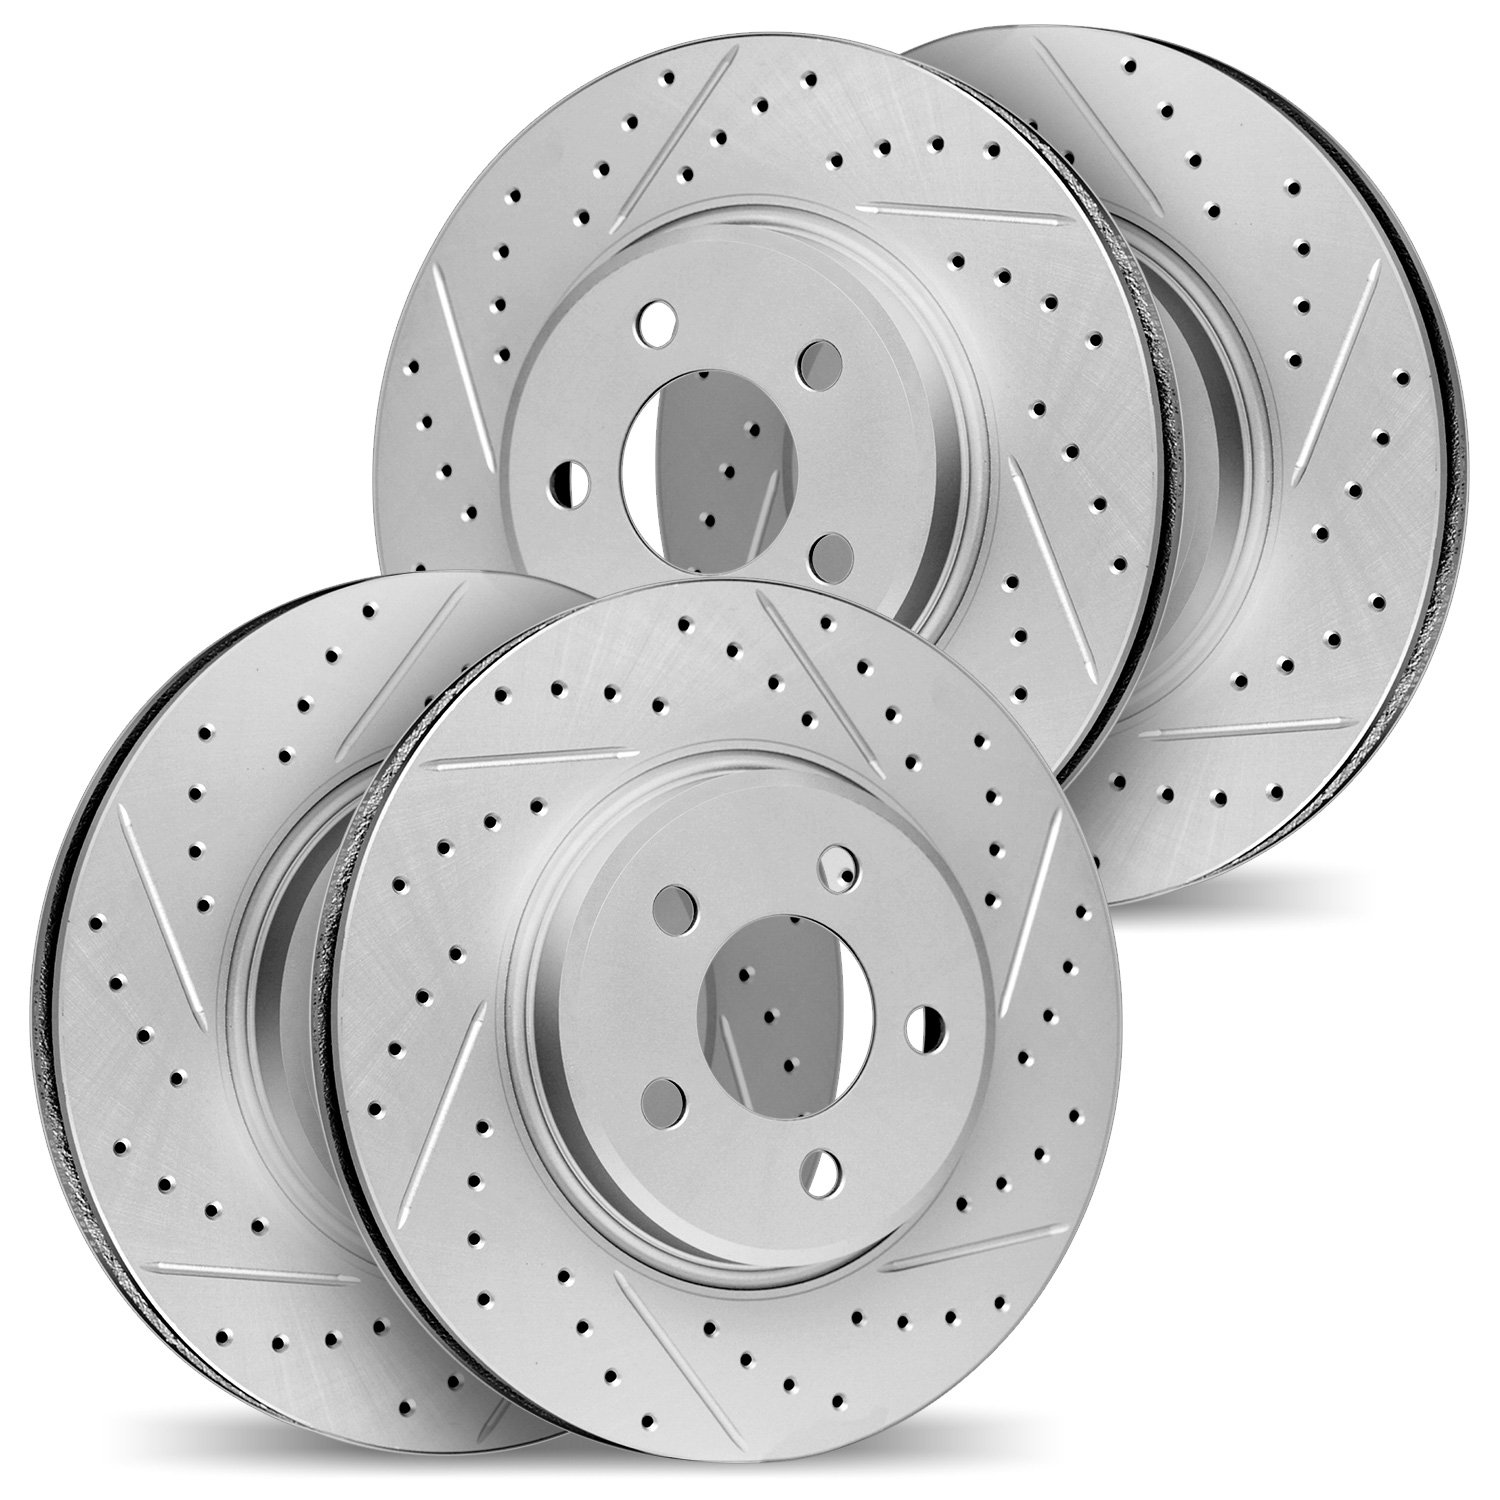 2004-31030 Geoperformance Drilled/Slotted Brake Rotors, 2004-2010 BMW, Position: Front and Rear